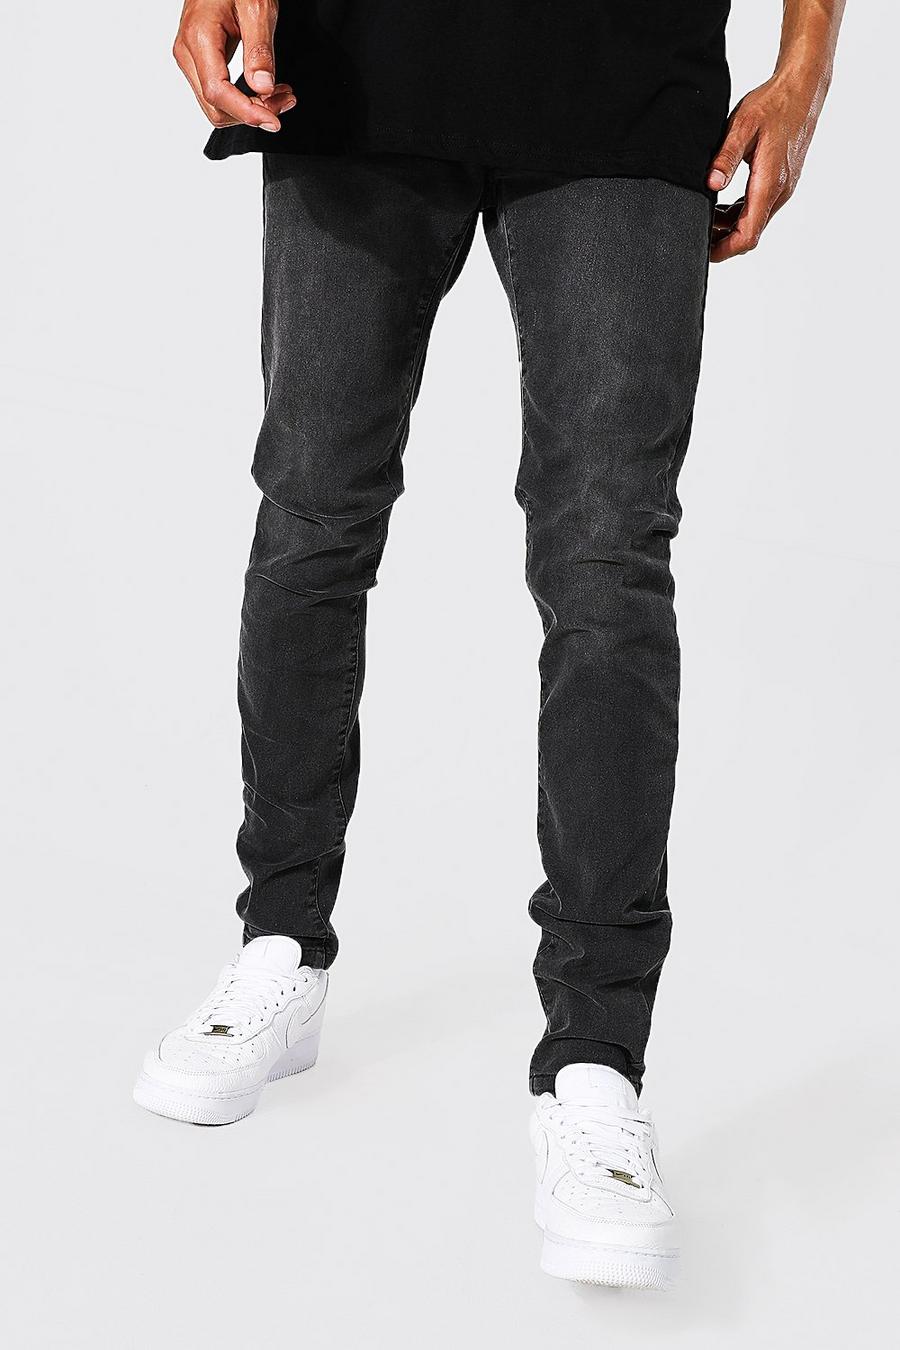 Charcoal Tall Skinny Stretch Jeans image number 1